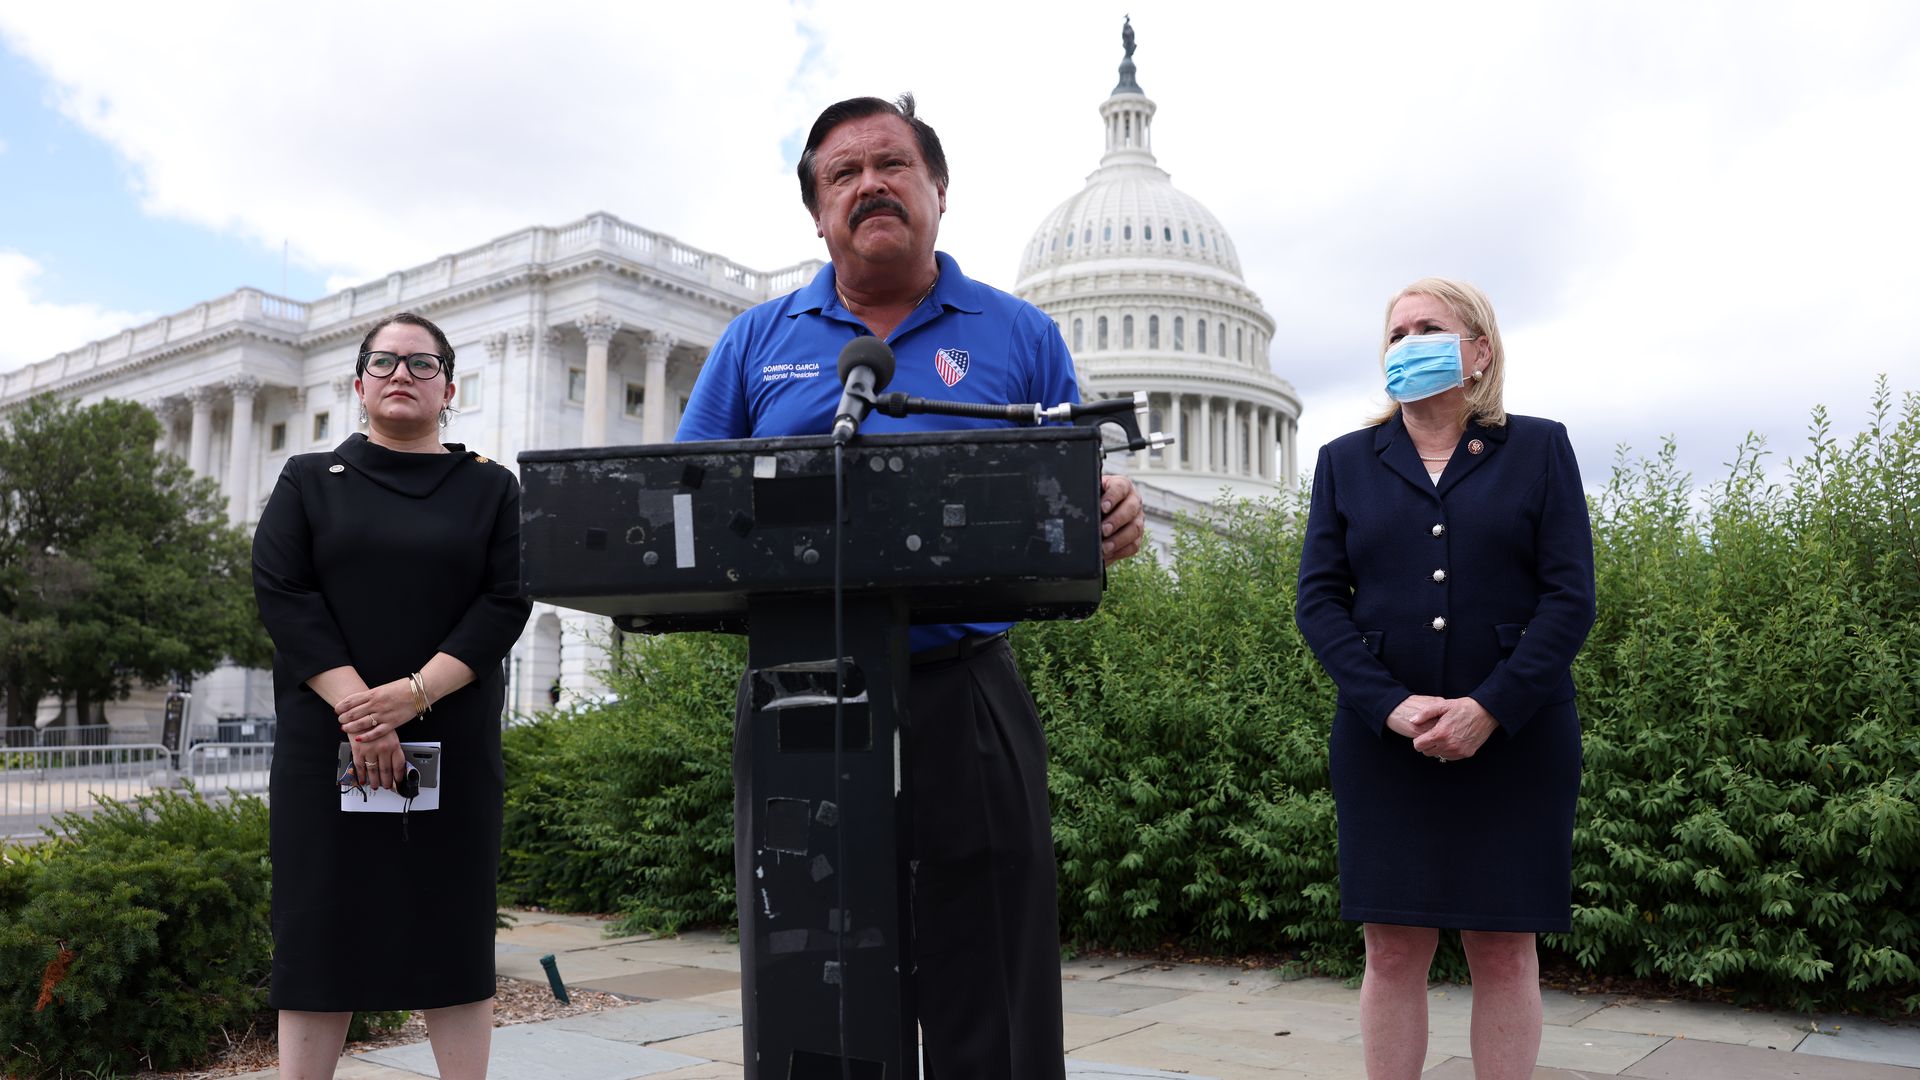 ULAC National President Domingo Garcia speaks as LULAC National CEO Sindy Benavides and U.S. Rep. Sylvia Garcia (D-TX) listen during a news conference July 10, 2020.